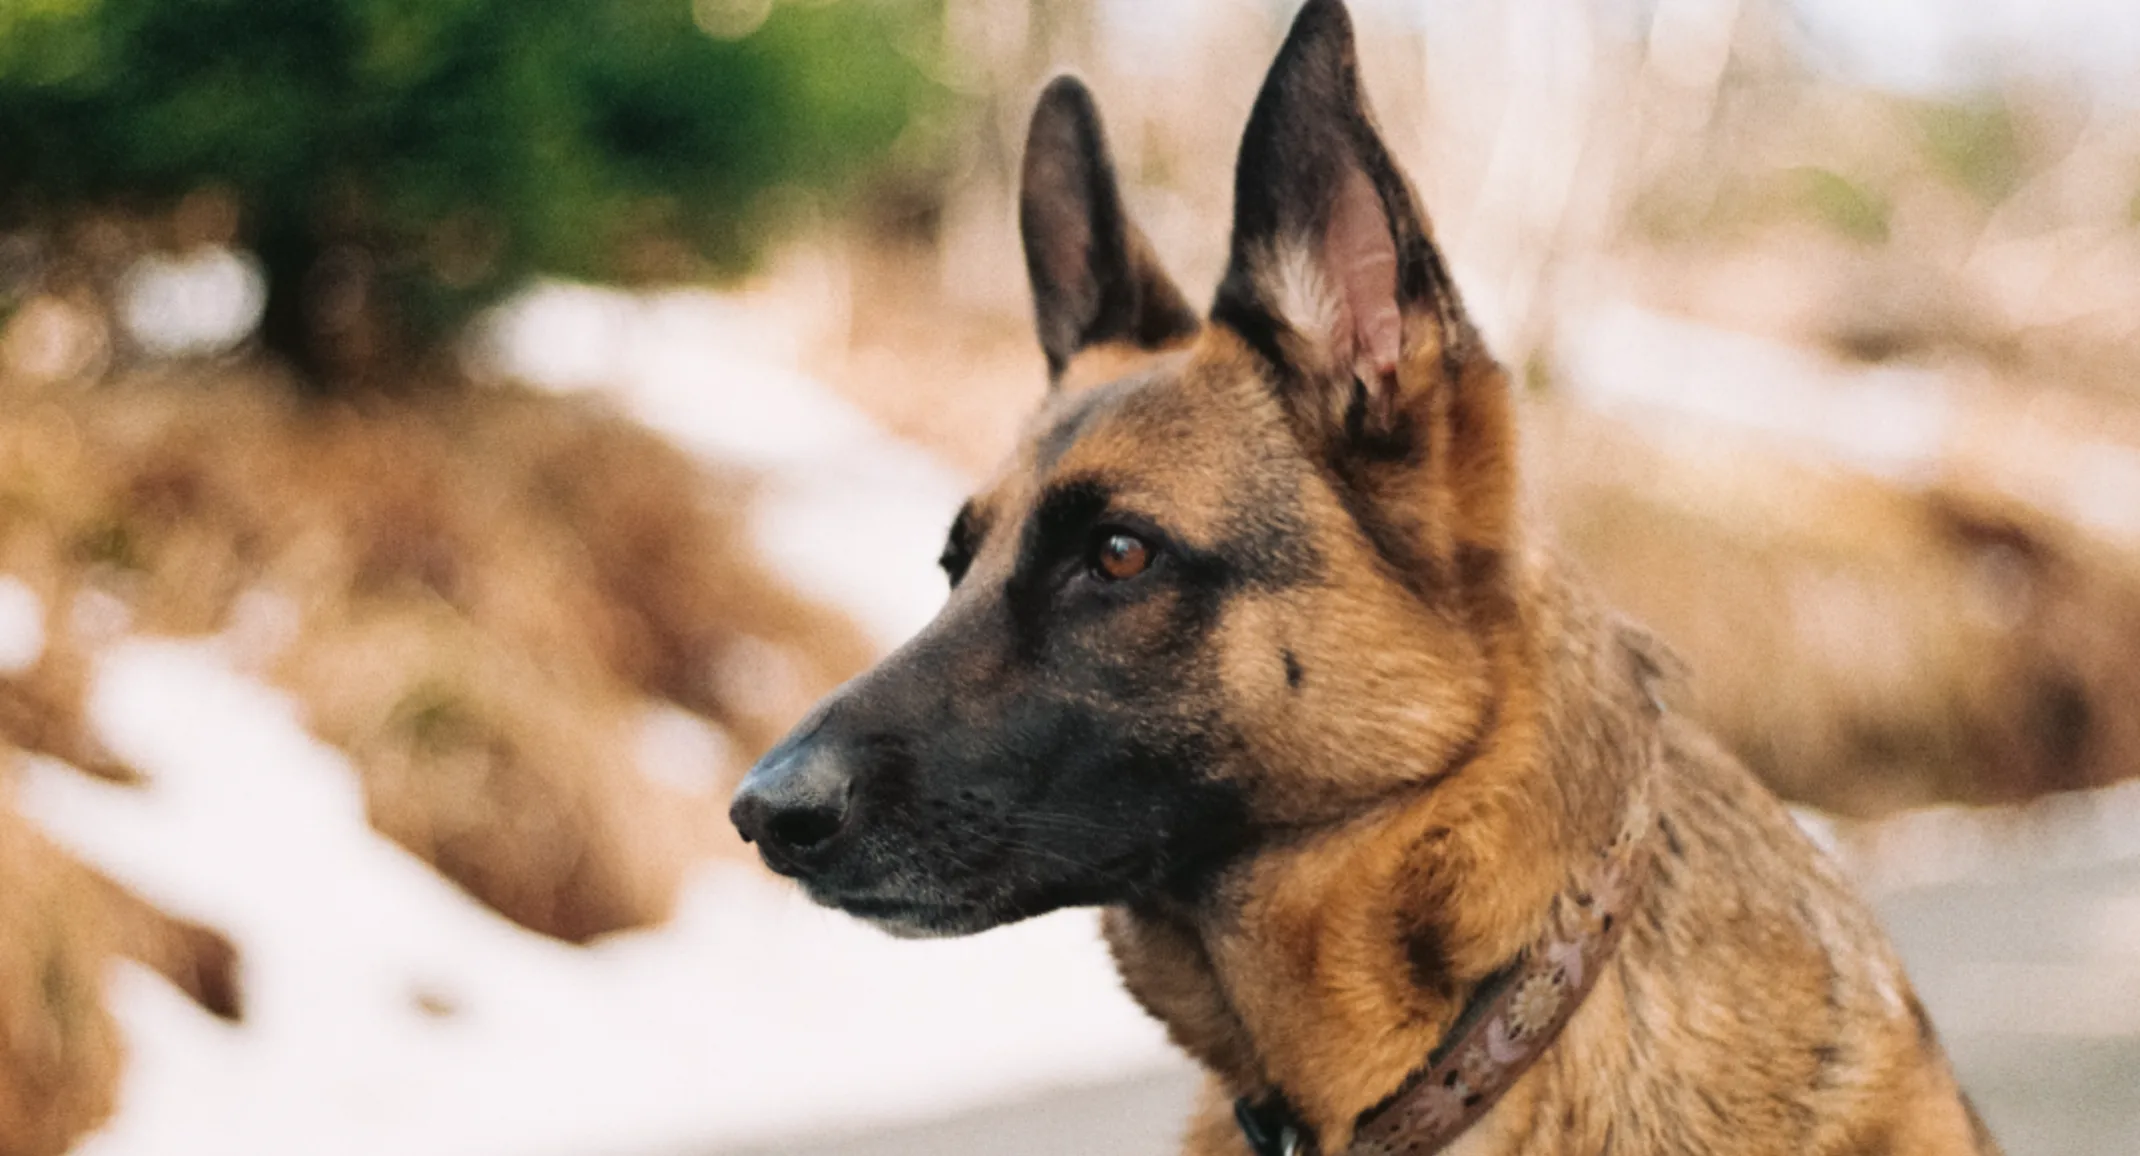 German shepherd standing in the street, staring off to the side